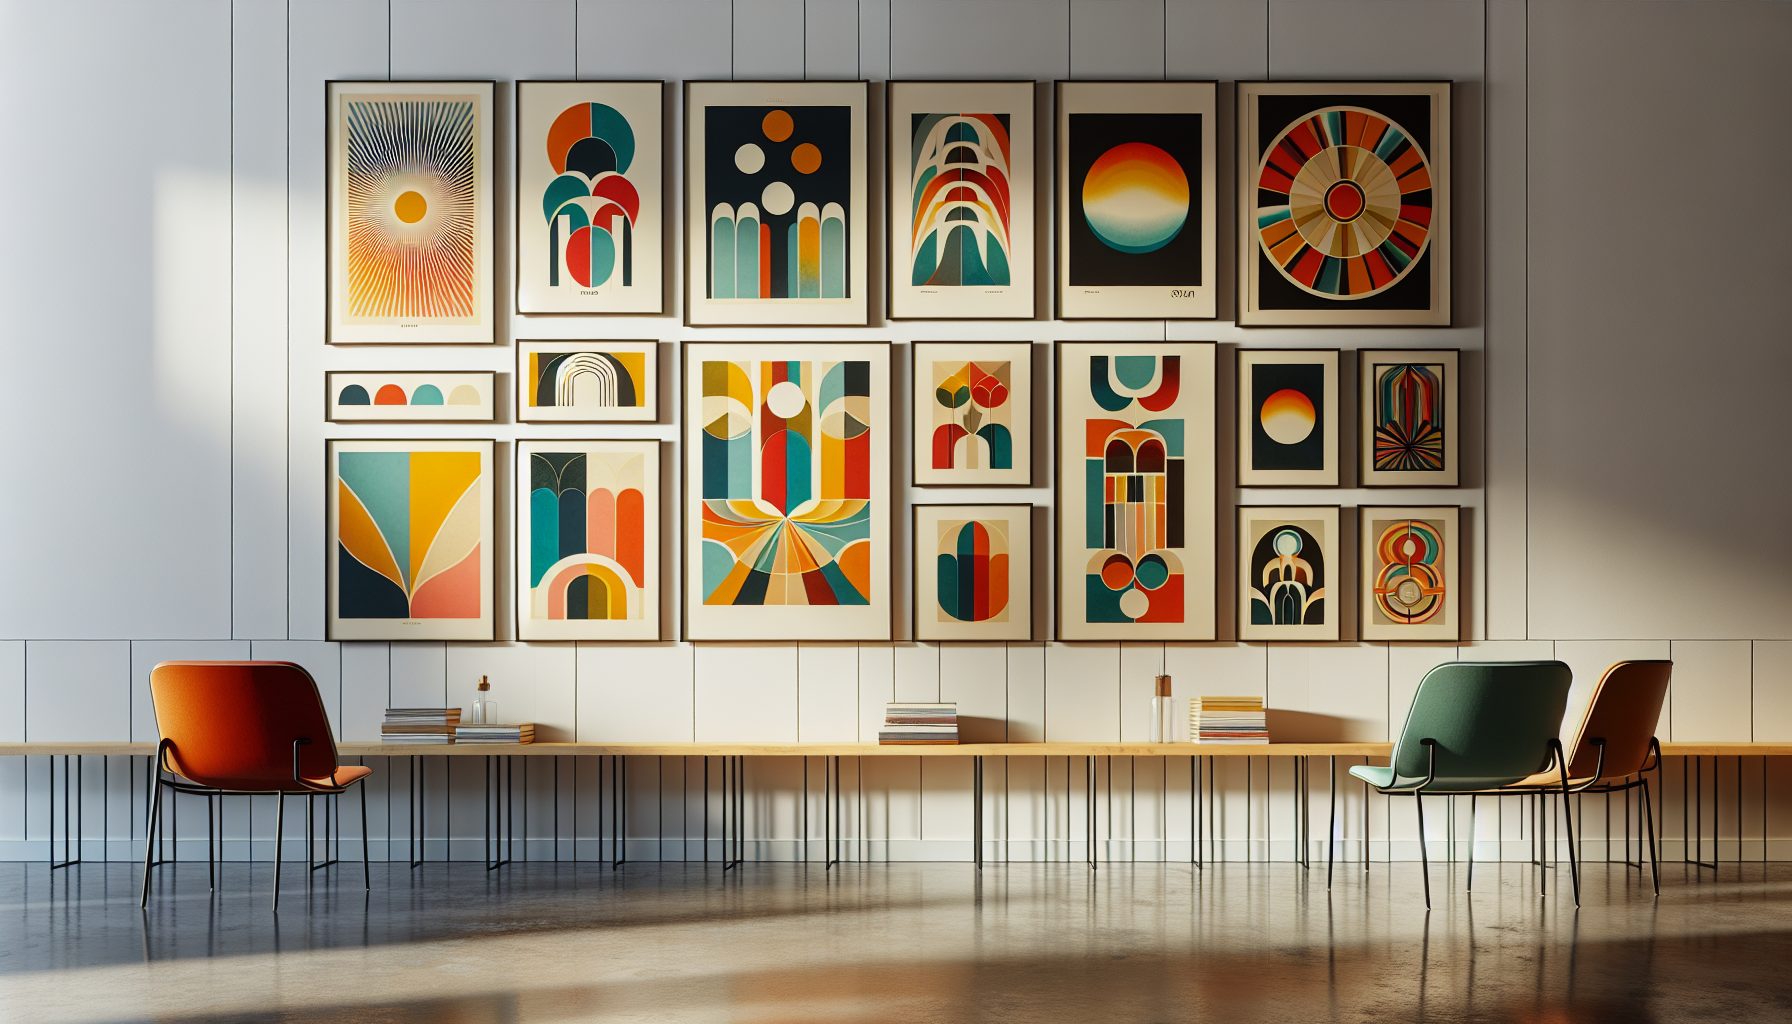 A collection of iconic mid-century modern art prints and posters